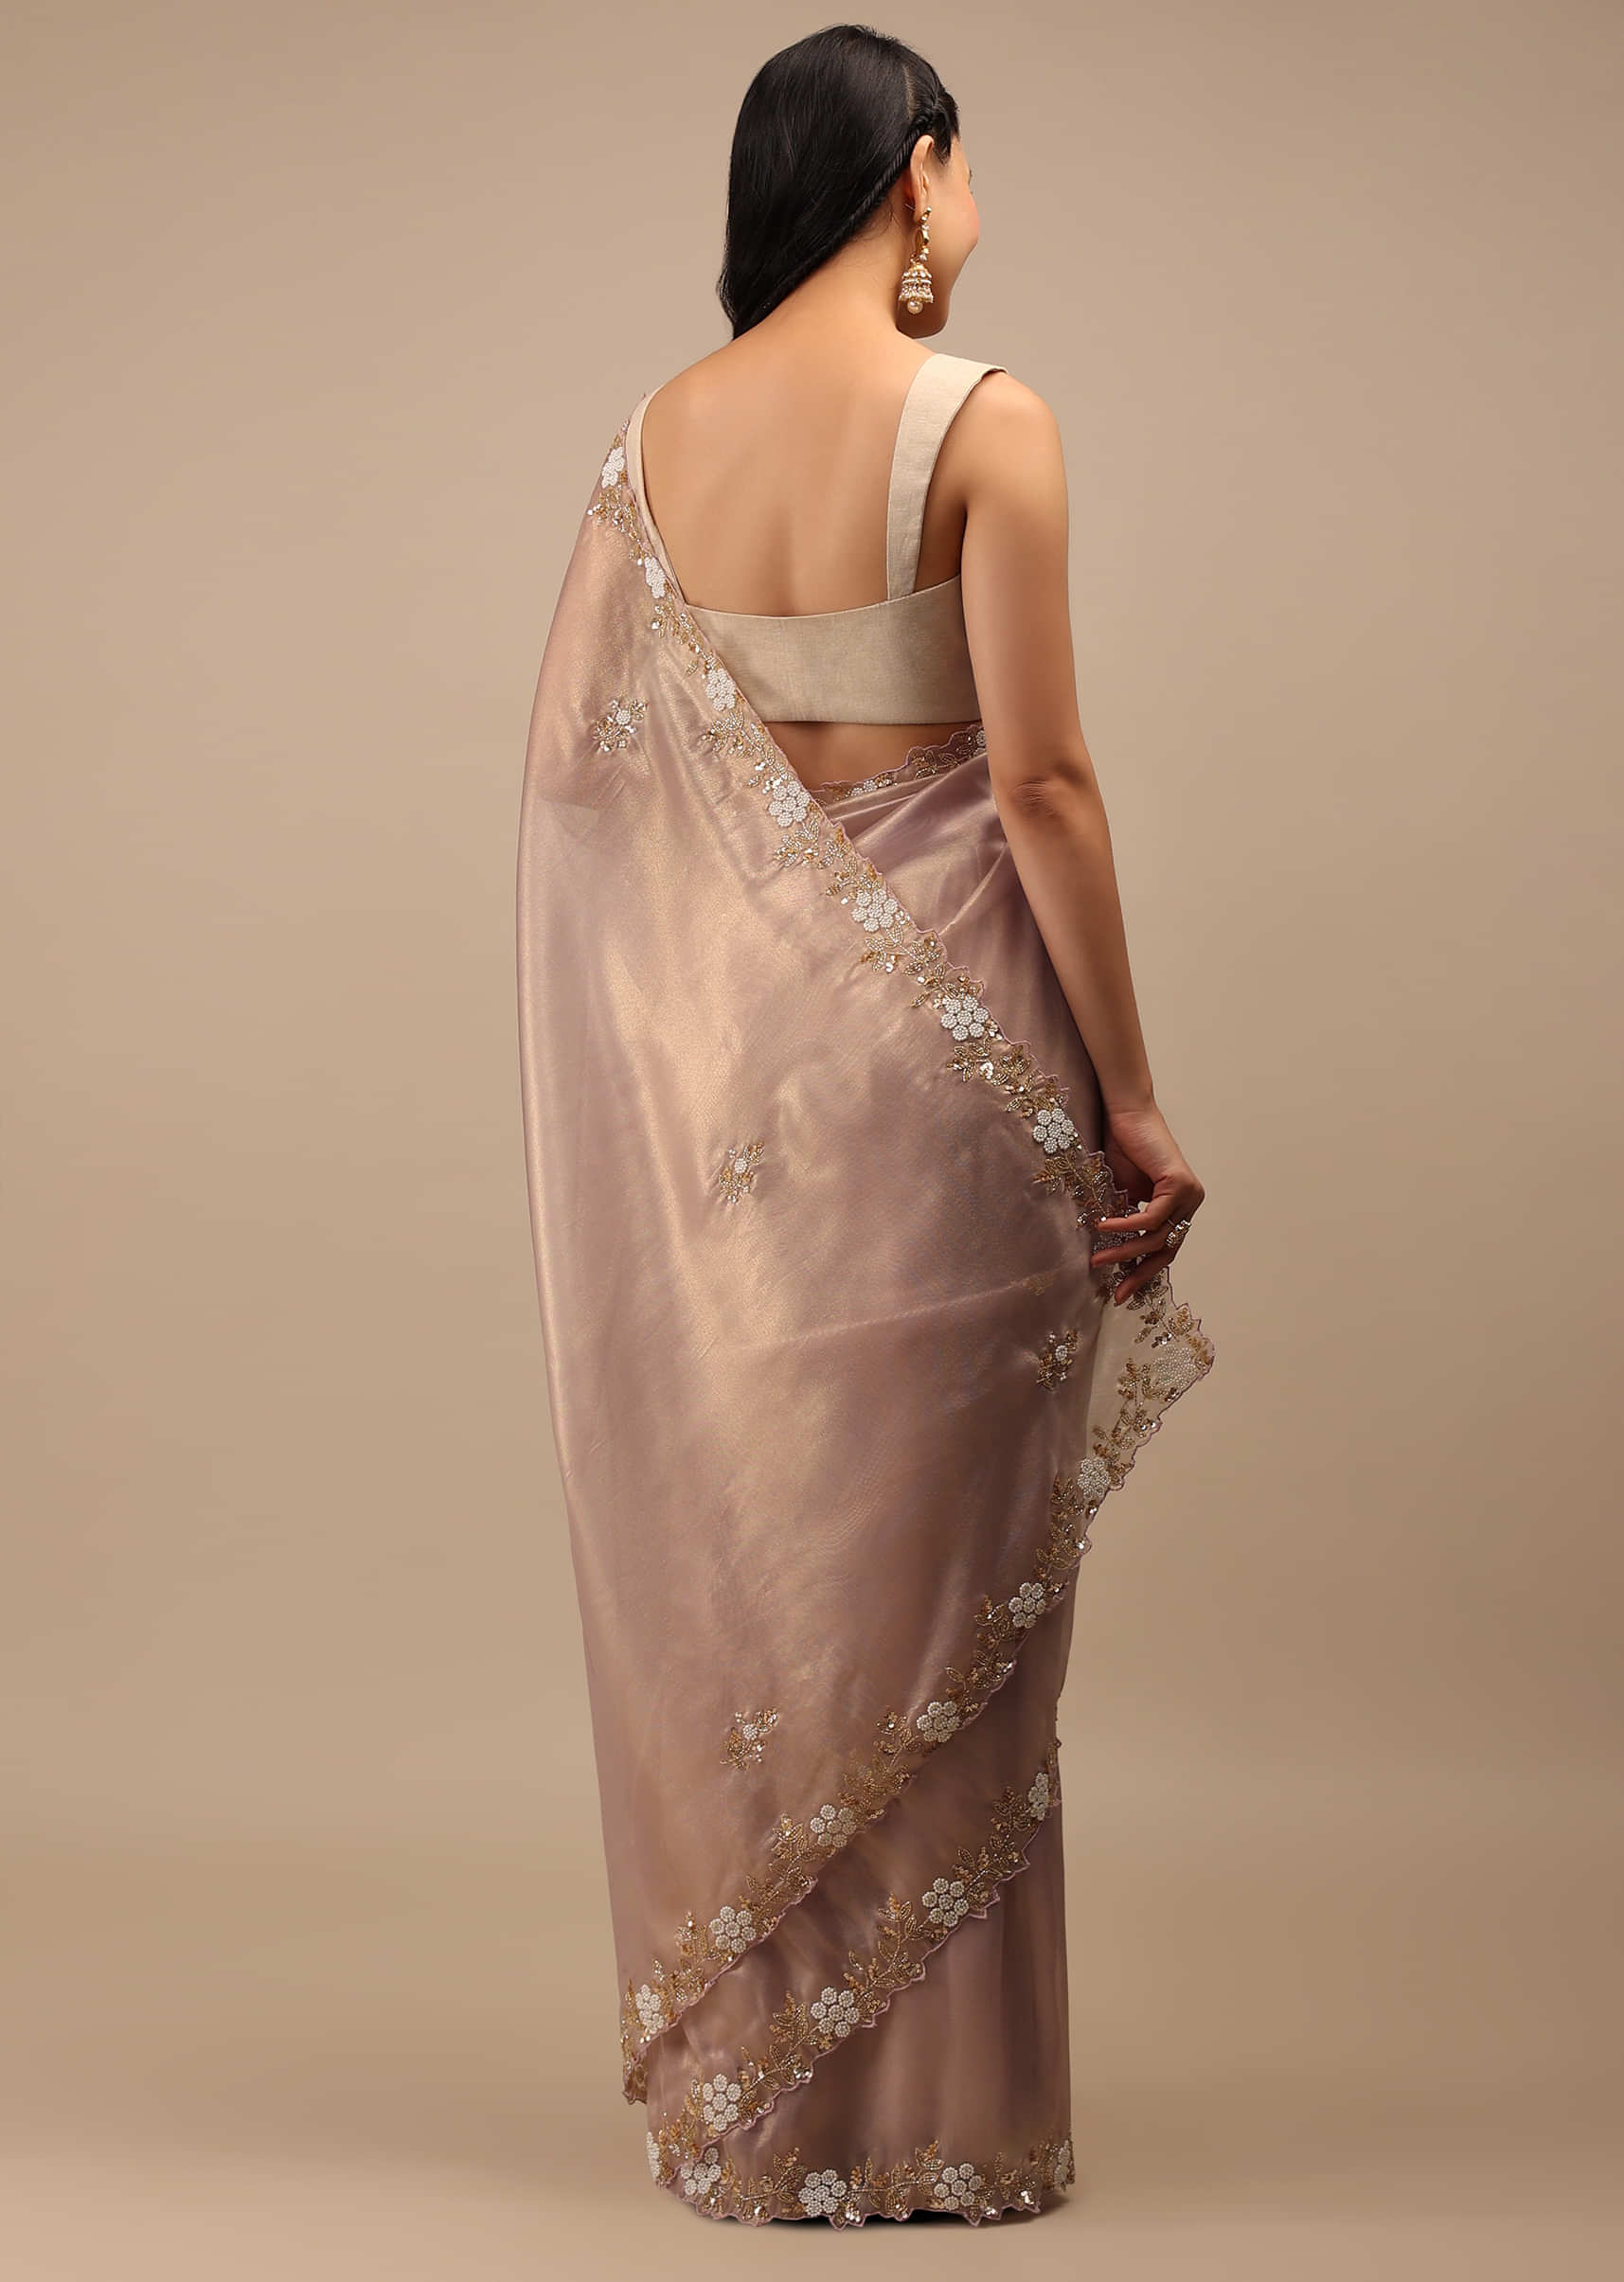 Mauve Tissue Saree In White Moti And Cut Dana Embroidery Buttis, Border Has Cutwork Embroidery Detailing